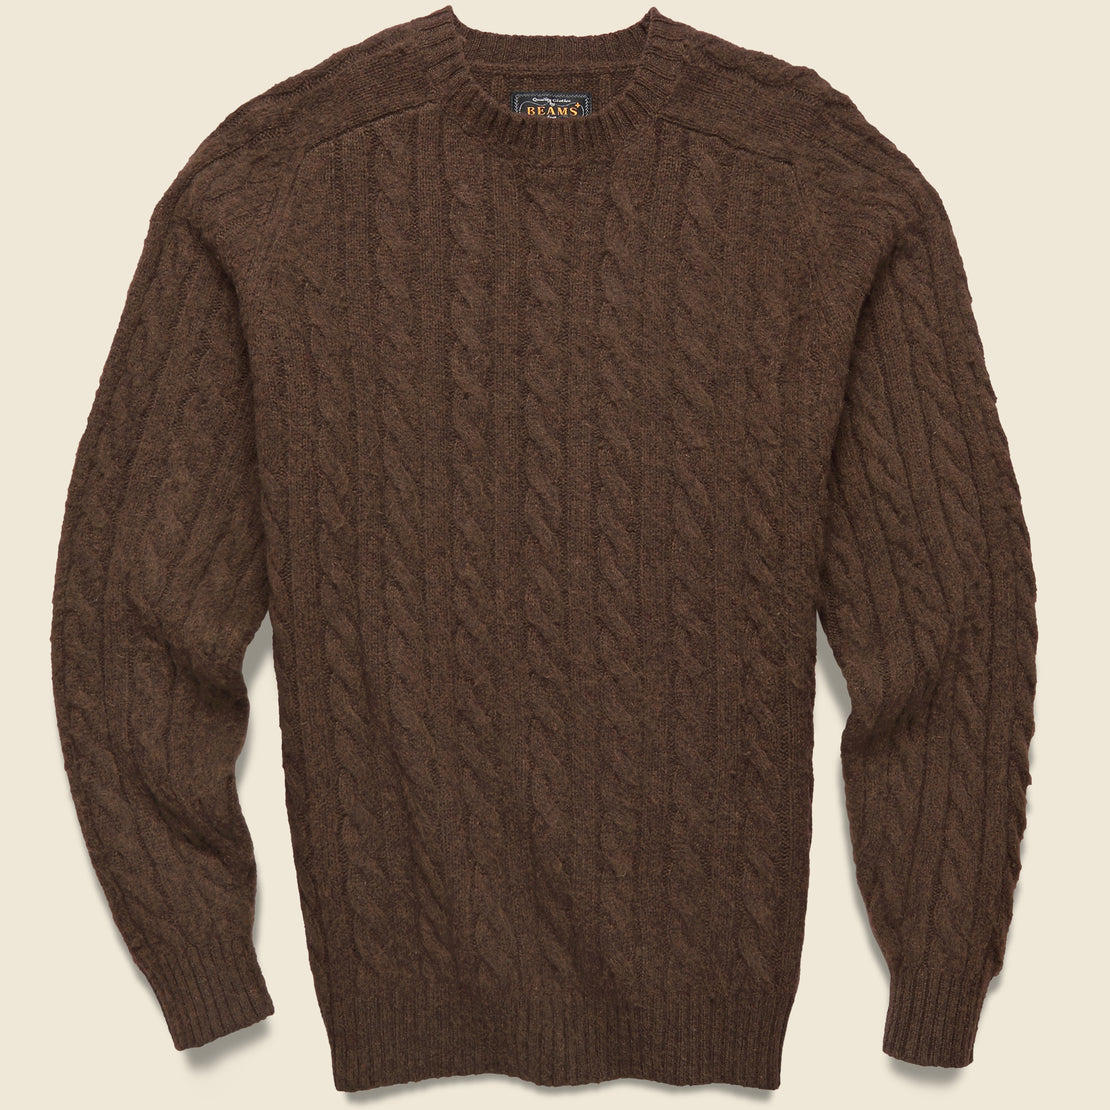 BEAMS+ Shaggy Cable Crew Sweater - Brown